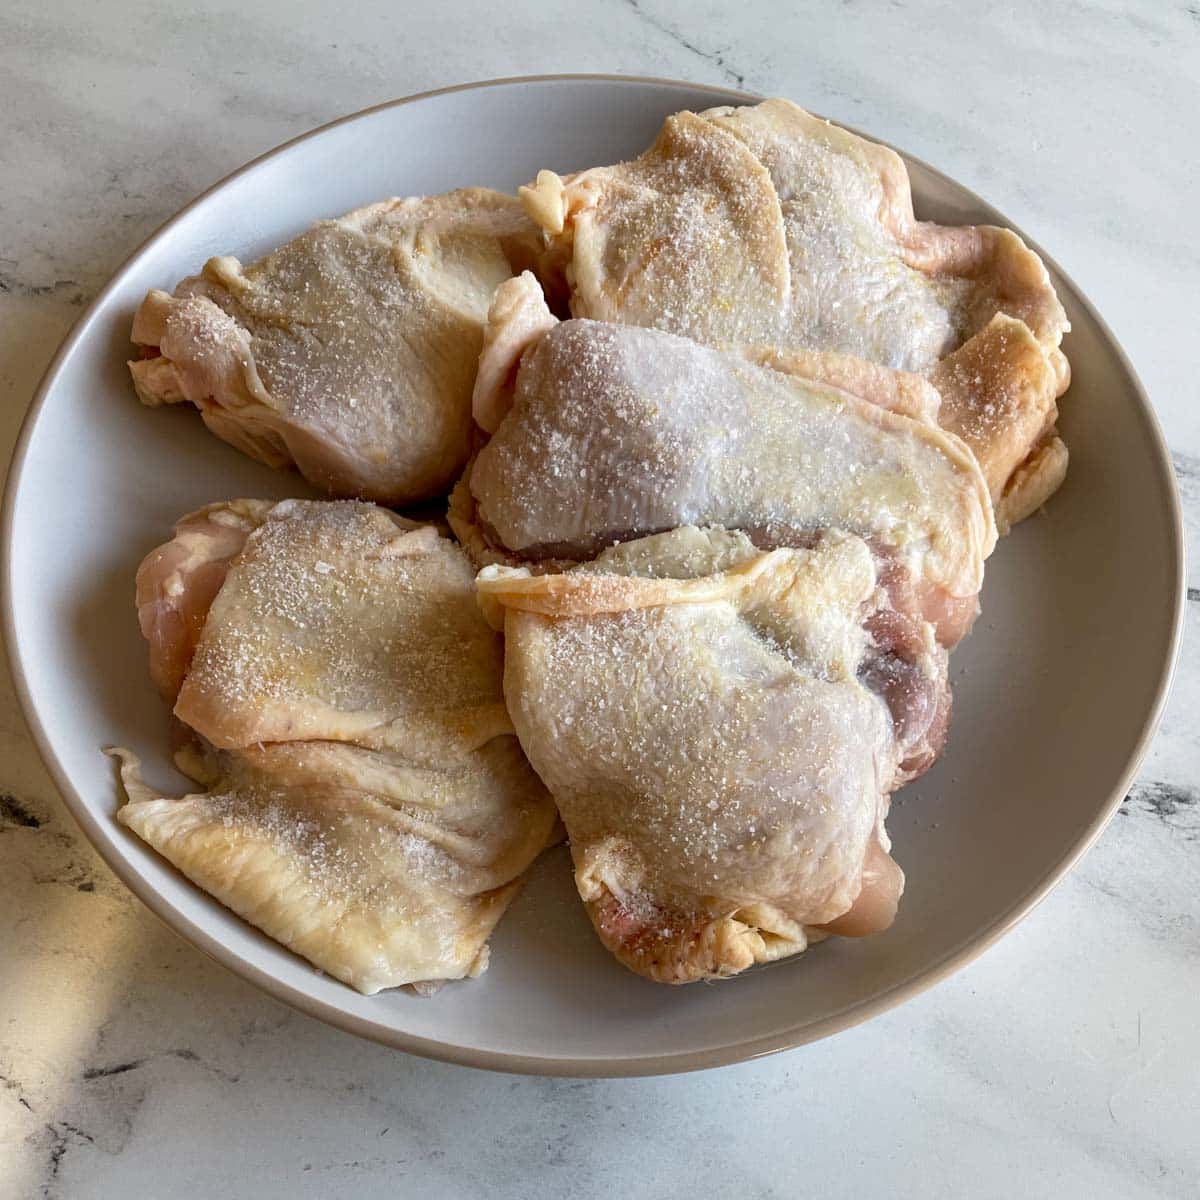 Raw chicken thighs dusted with kosher salt sit on a white plate.